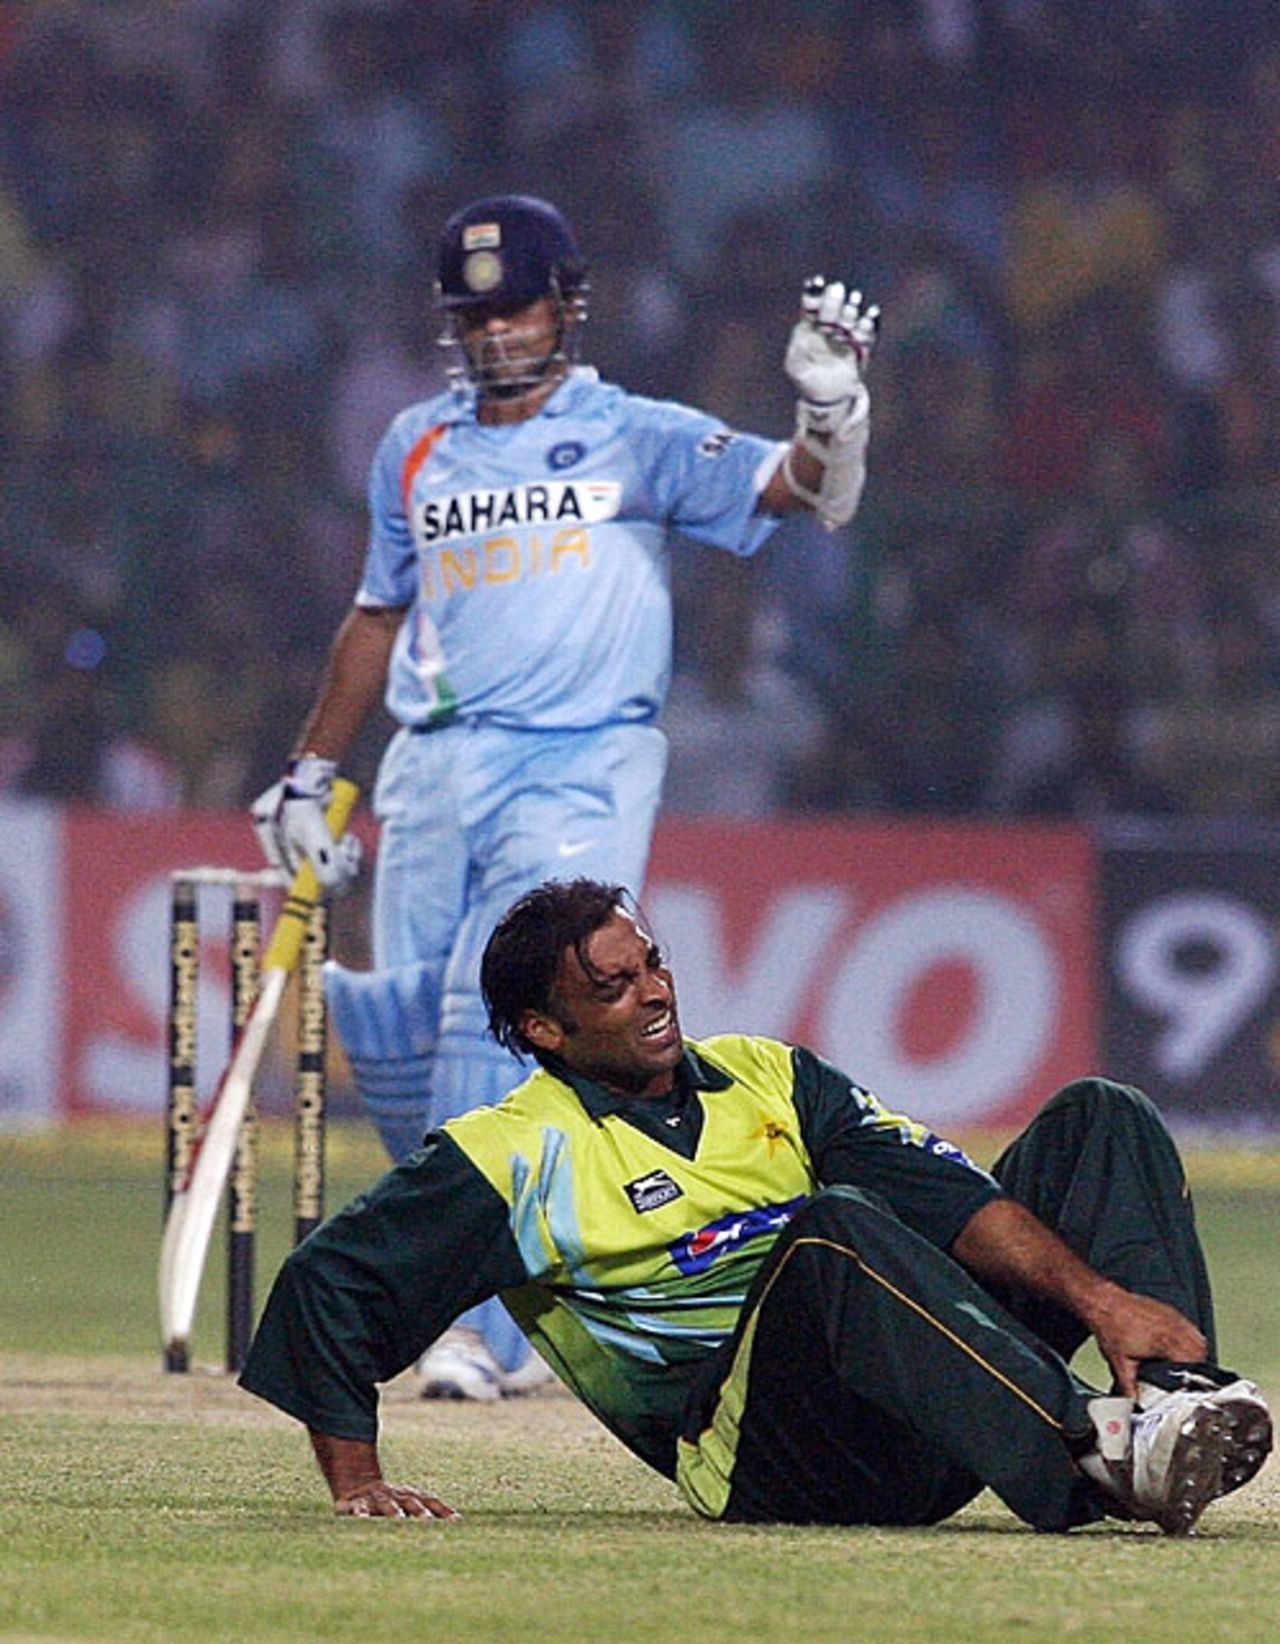 Shoaib Akhtar clutches his foot in pain after the ball, off Sachin Tendulkar's bat, collided with his foot, India v Pakistan, 4th ODI, Gwalior, November 15, 2007